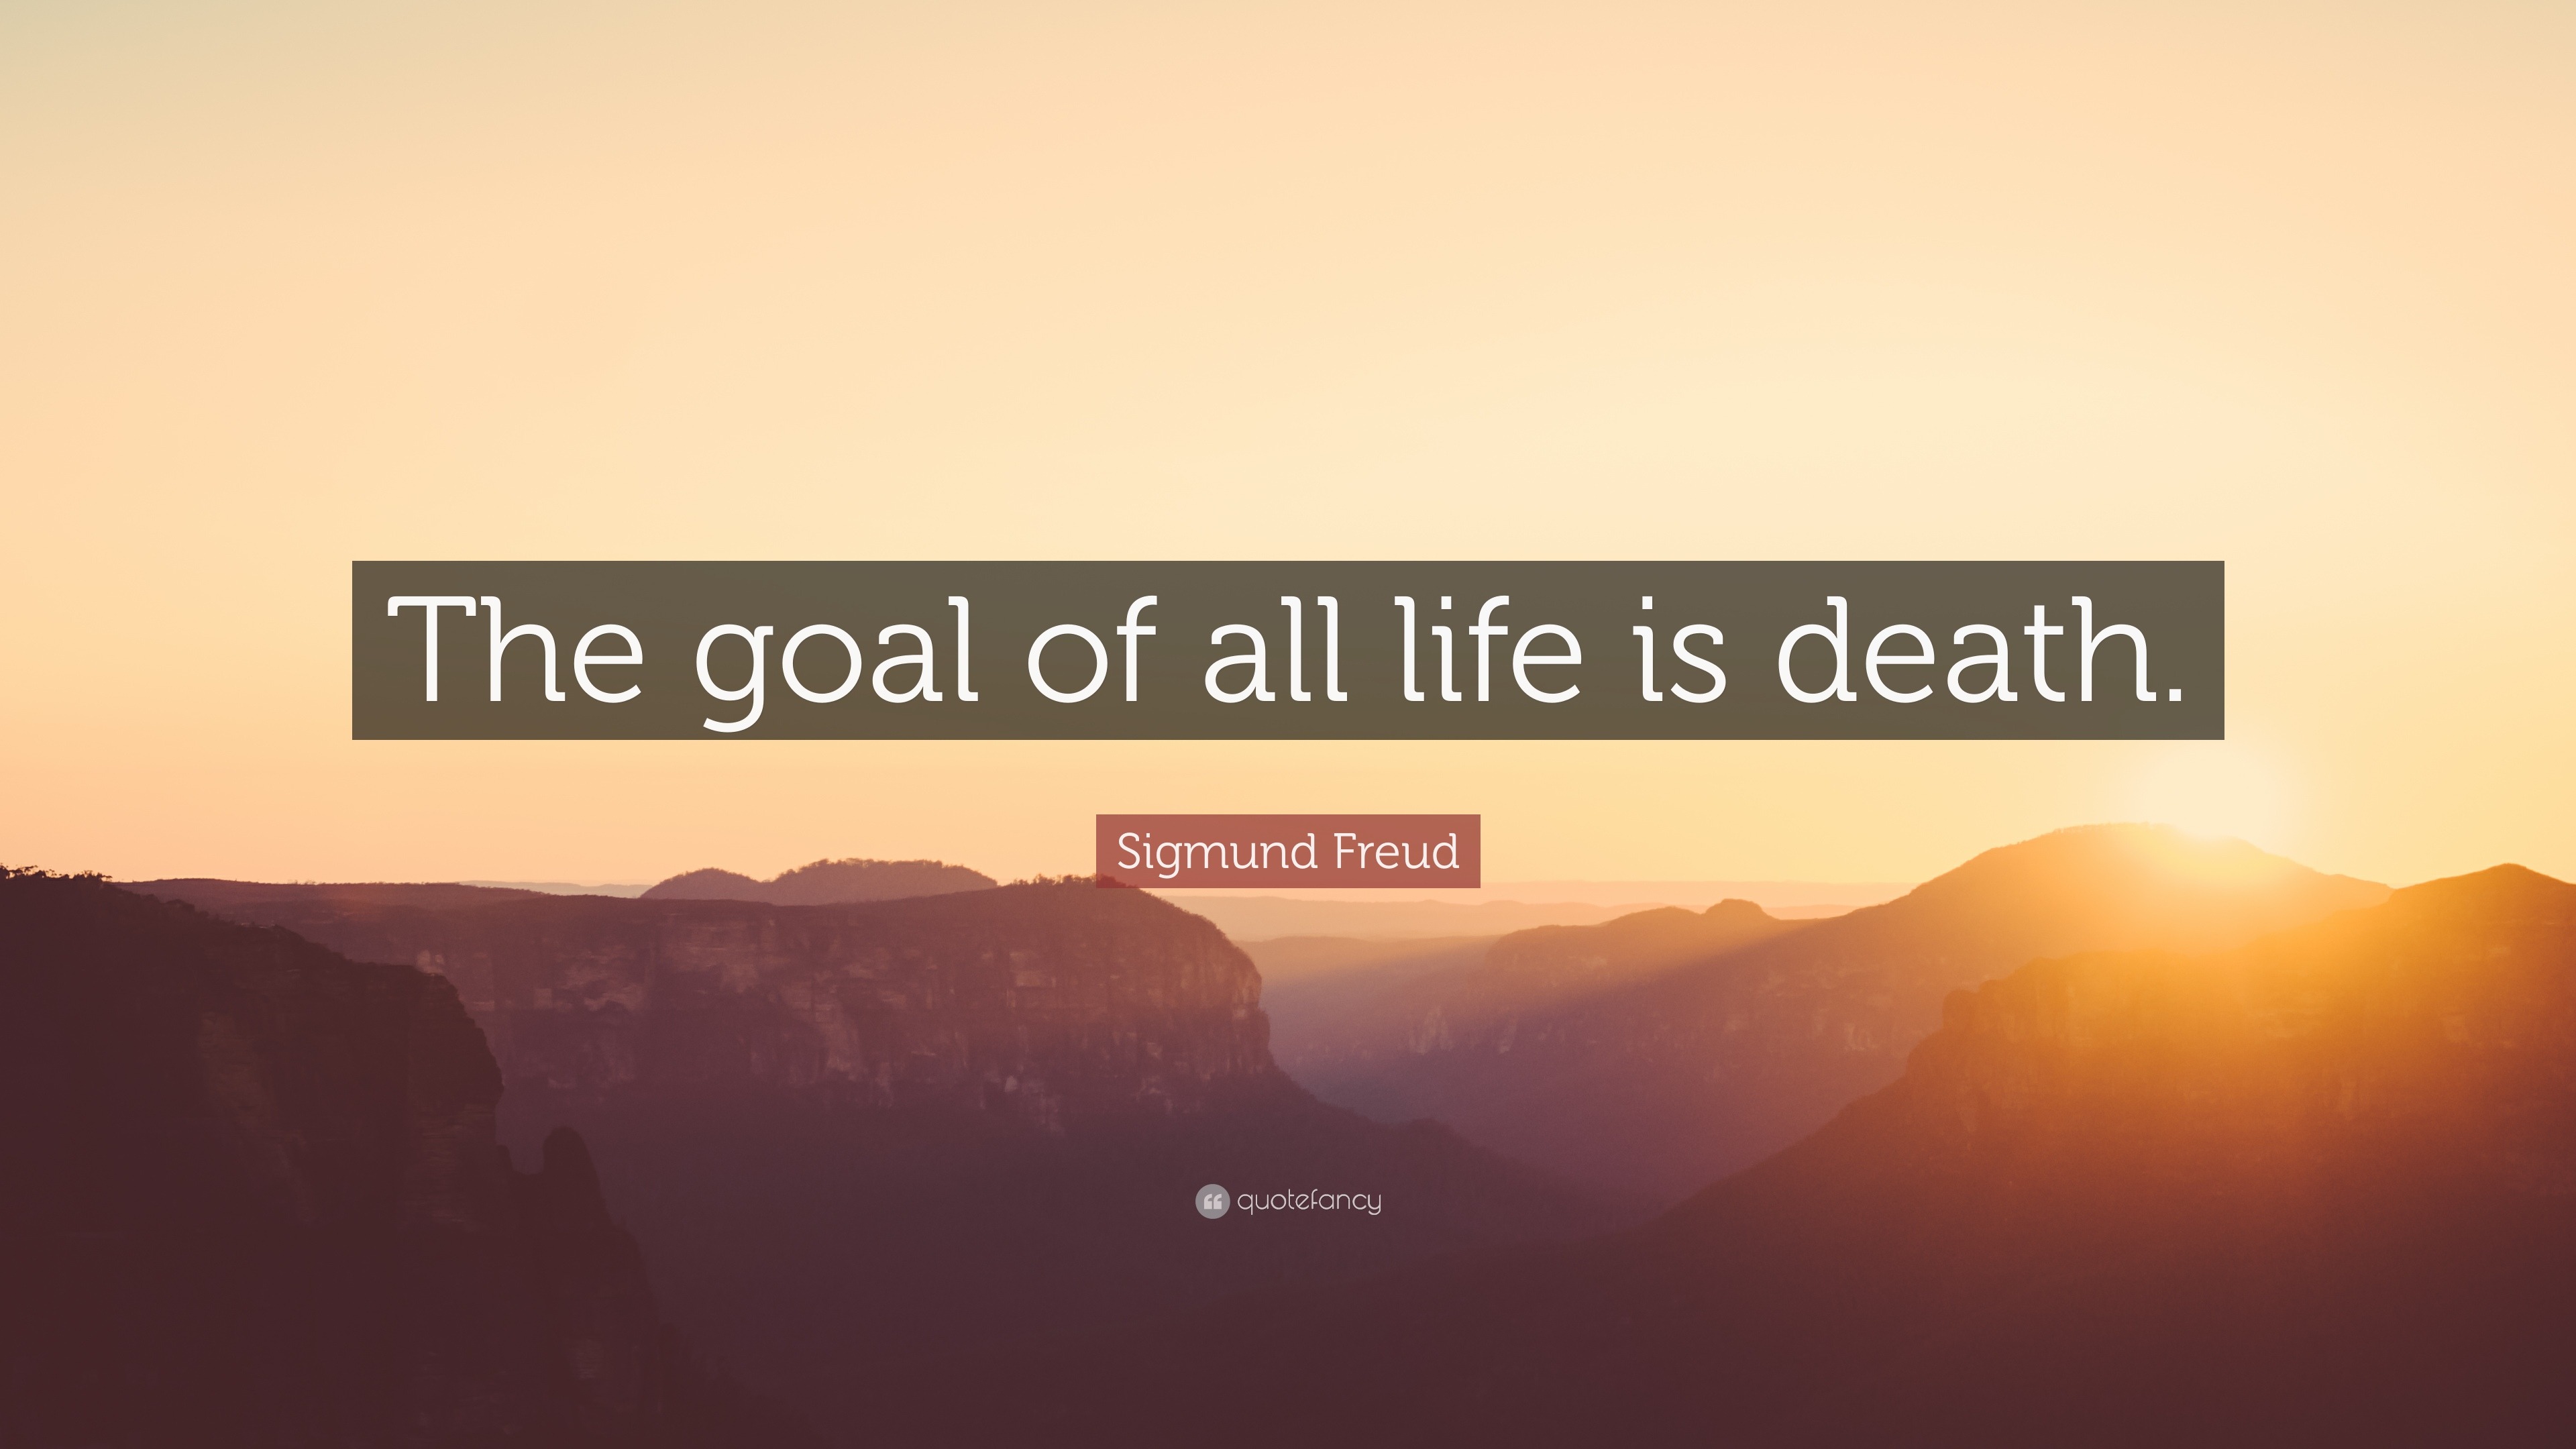 Sigmund Freud Quote “The goal of all life is ”